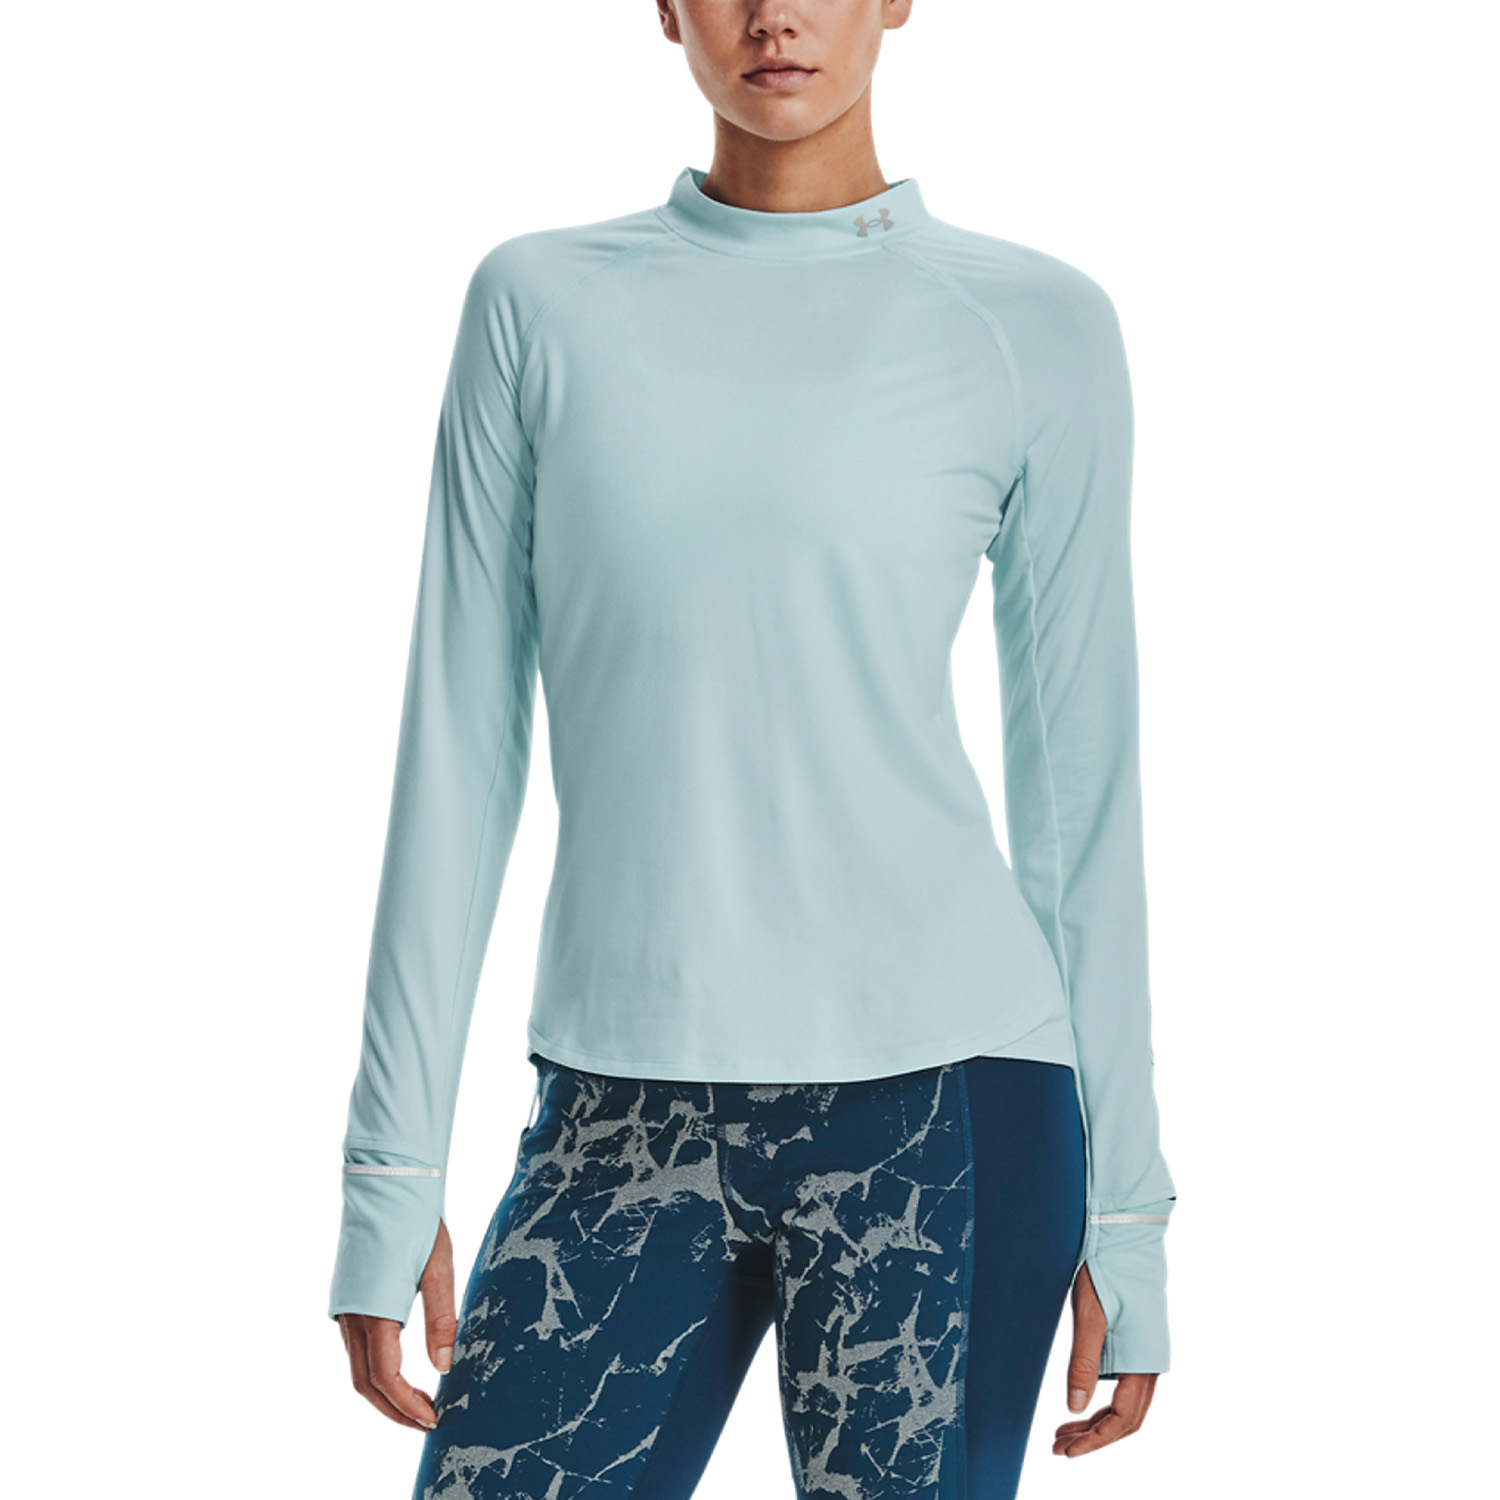 Under Armour Outrun The Cold Shirt - Fuse Teal/Reflective